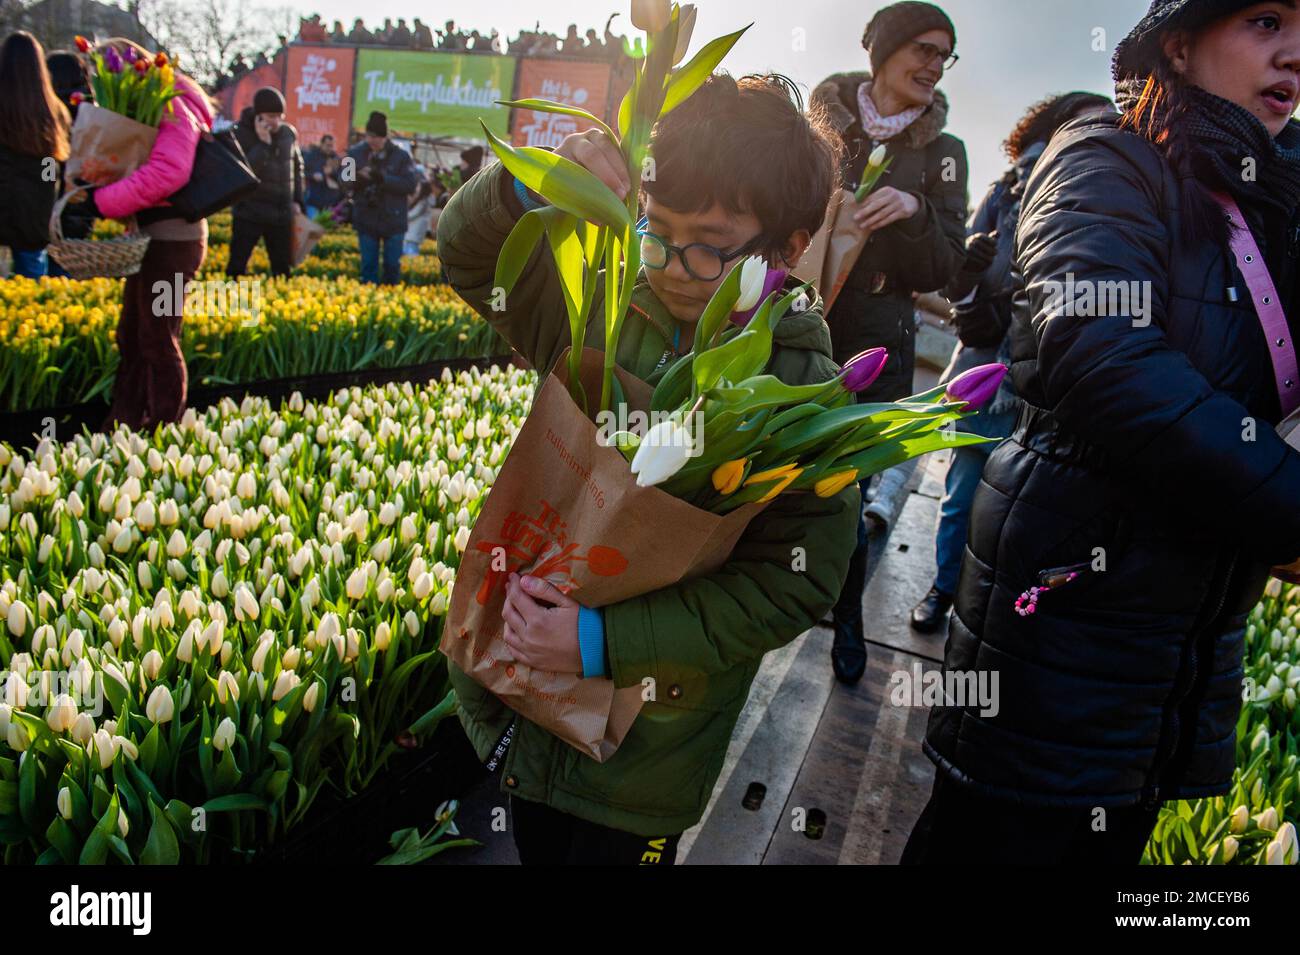 A little boy seen holding a paper bag full of tulips. Each year on the 3rd Saturday of January, the National Tulip Day is celebrated in Amsterdam. Dutch tulip growers built a huge picking garden with more than 200,000 colorful tulips at the Museumplein in Amsterdam. Visitors are allowed to pick tulips for free. The event was opened by Olympic skating champion, Irene Schouten. Prior to the opening, she christened a new tulip: Tulipa 'Dutch Pearl' as a reference to the world - famous painting 'The girl with a pearl earring' by Johannes Vermeer. (Photo by Ana Fernandez/SOPA Images/Sipa USA) Stock Photo